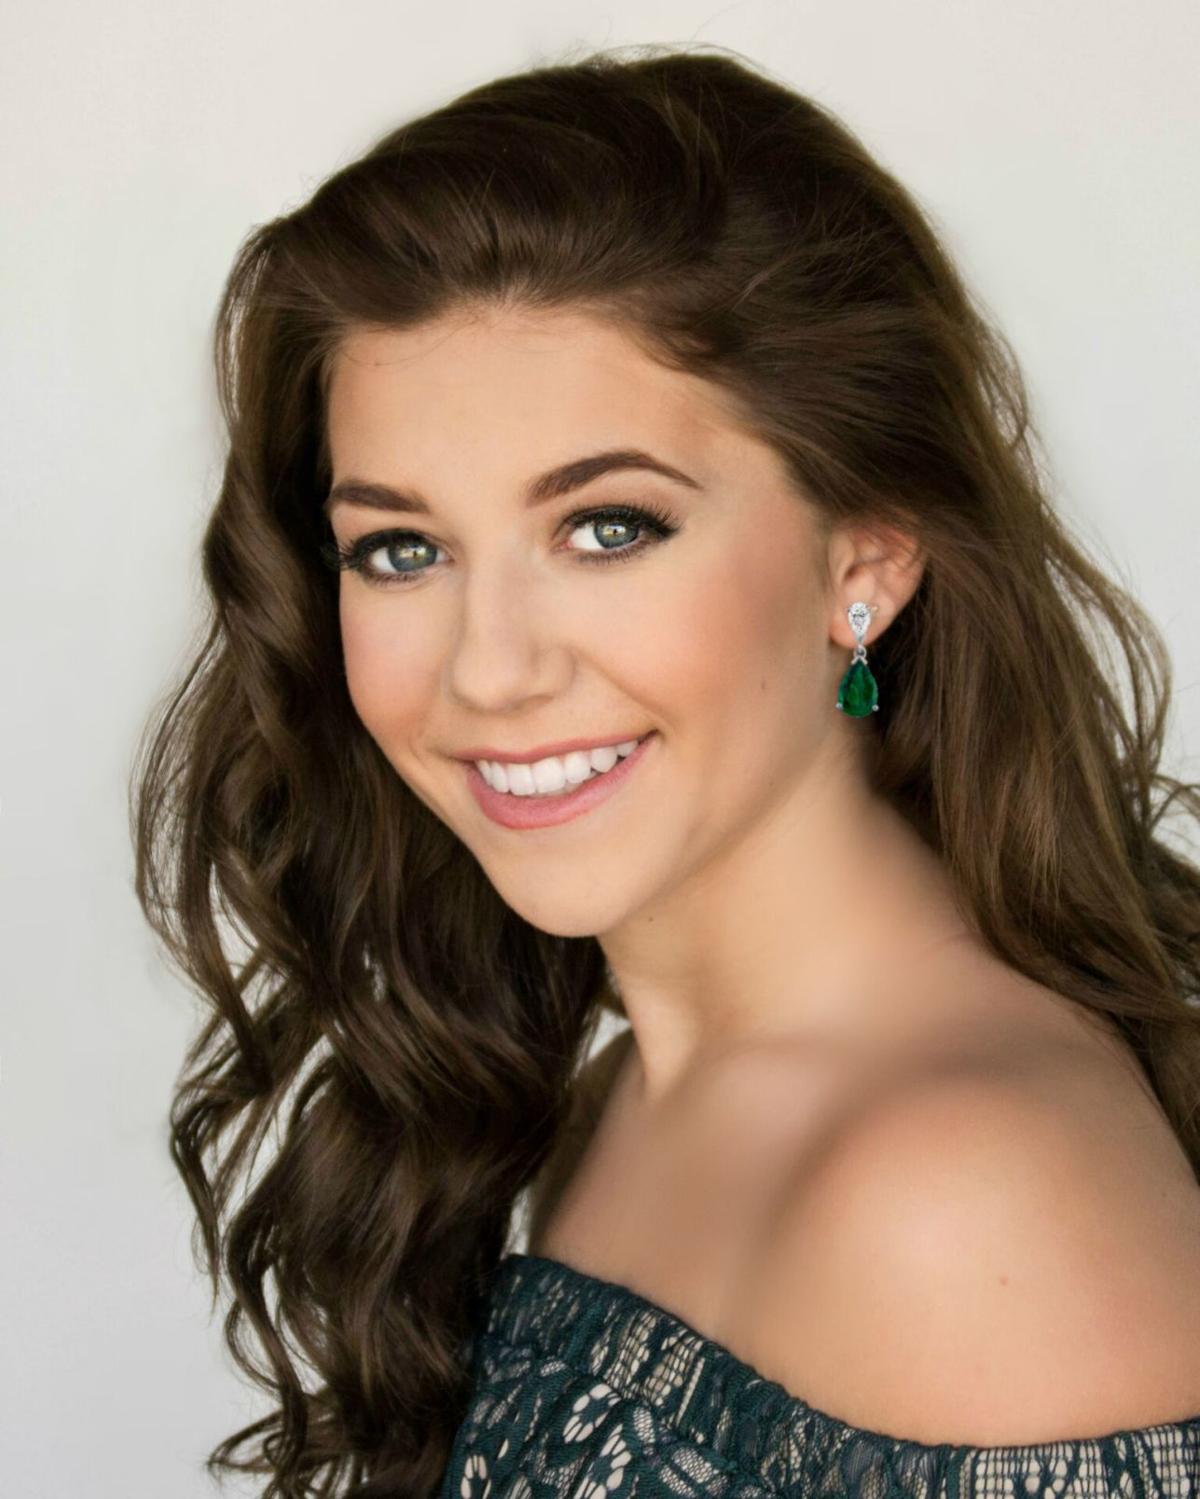 Miss Iowa S Outstanding Teen To Be Selected This Week At Adler Theatre Local News Qctimes Com